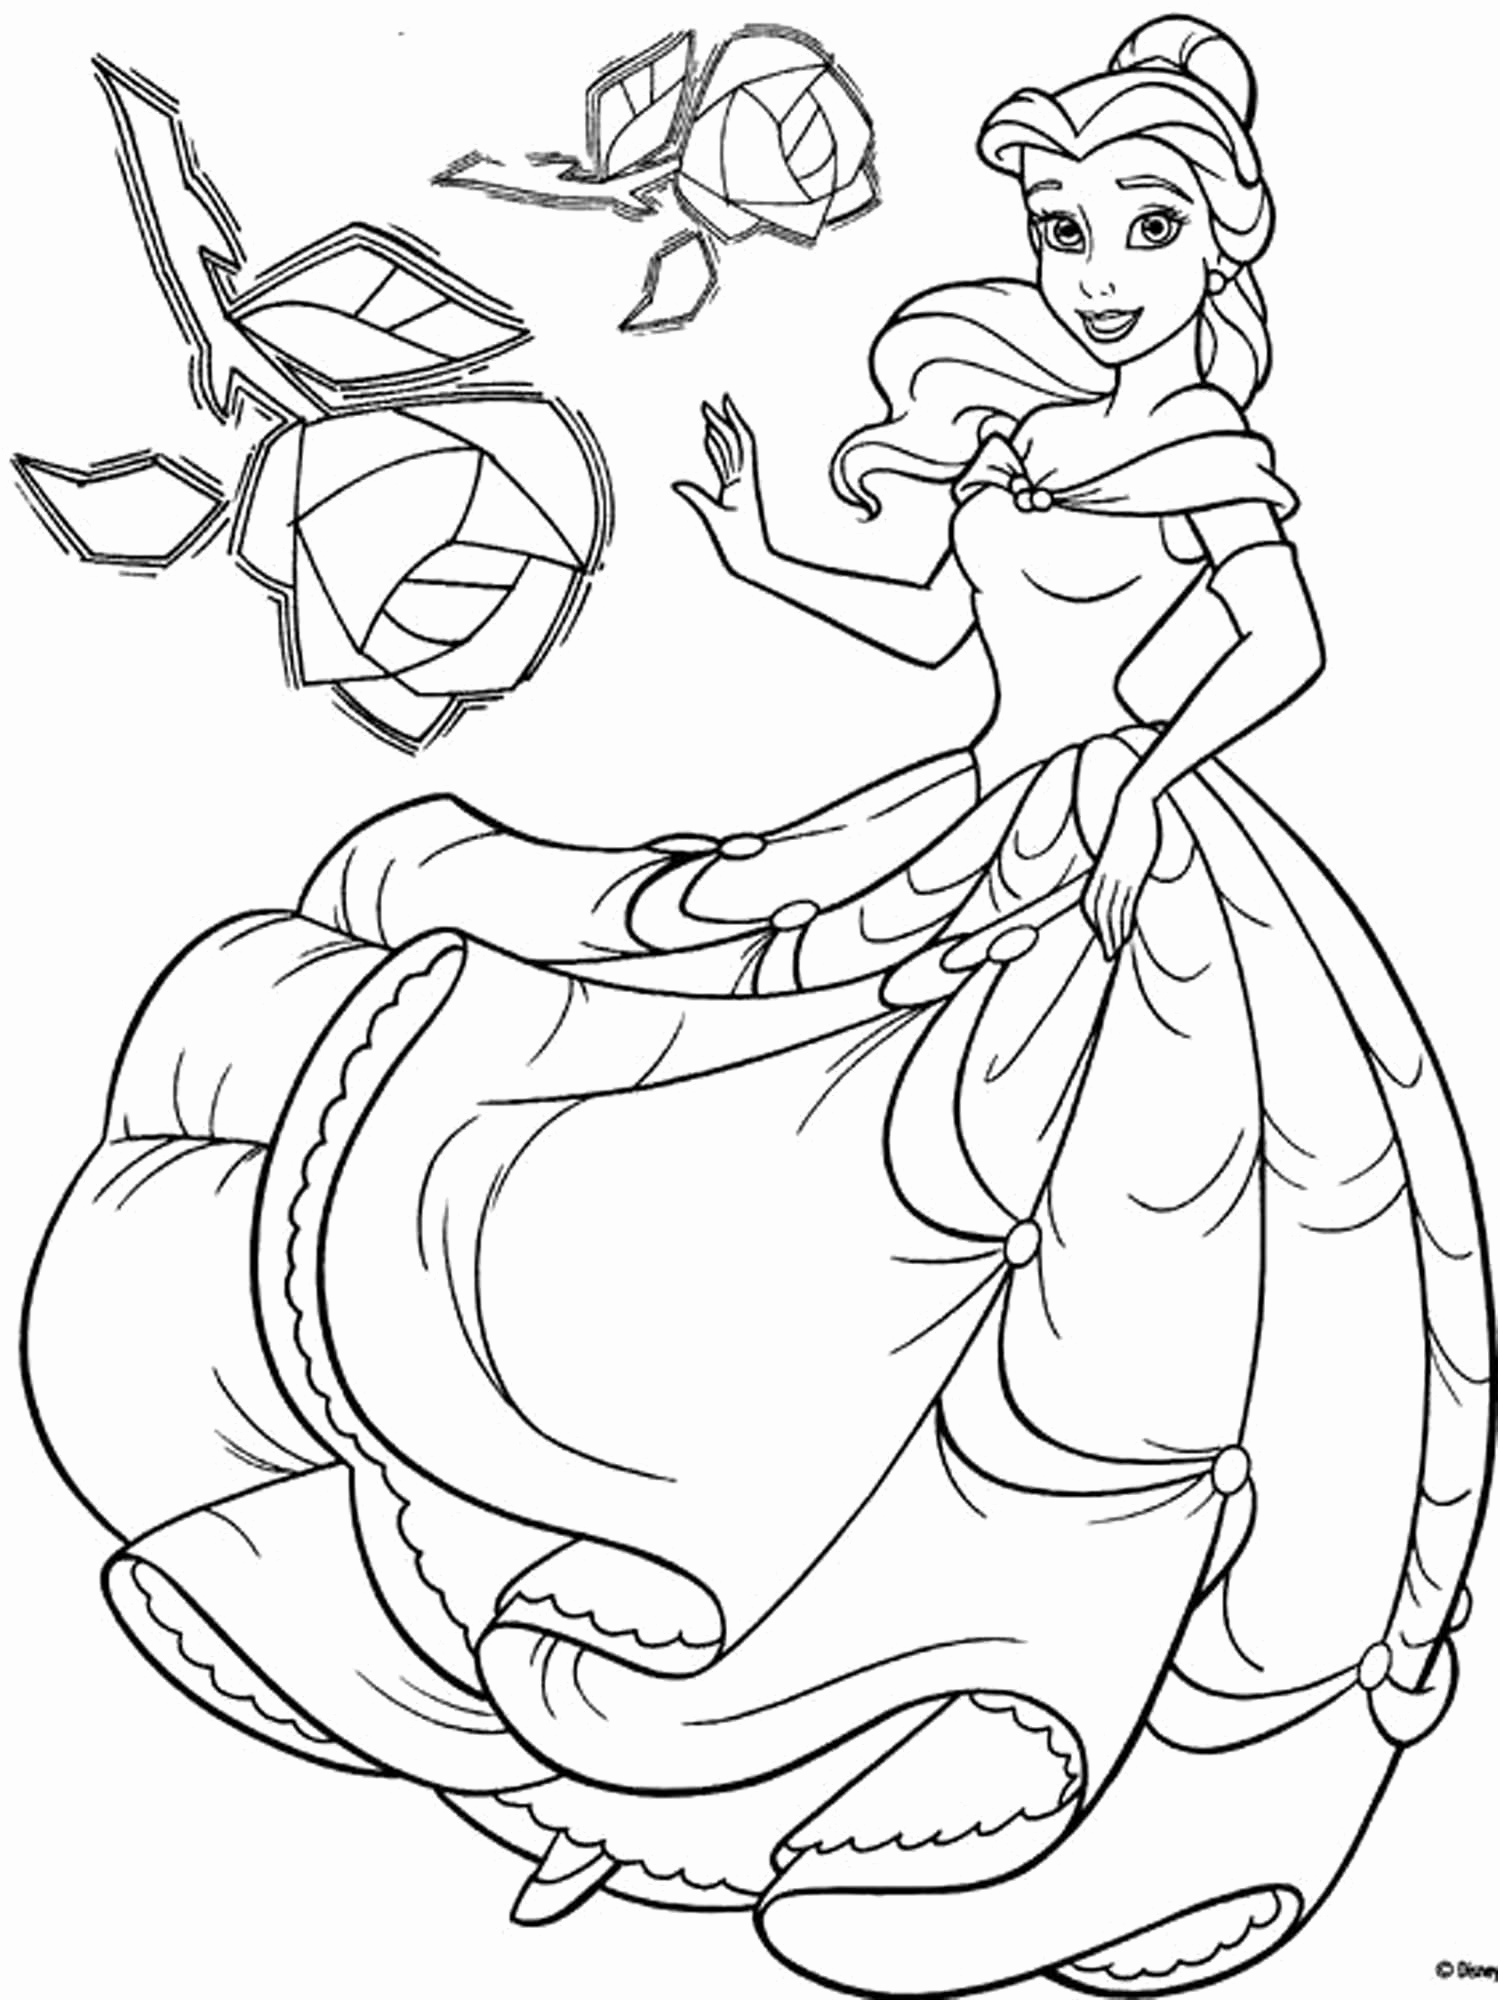 Princess Halloween Coloring Pages at GetColorings.com | Free printable